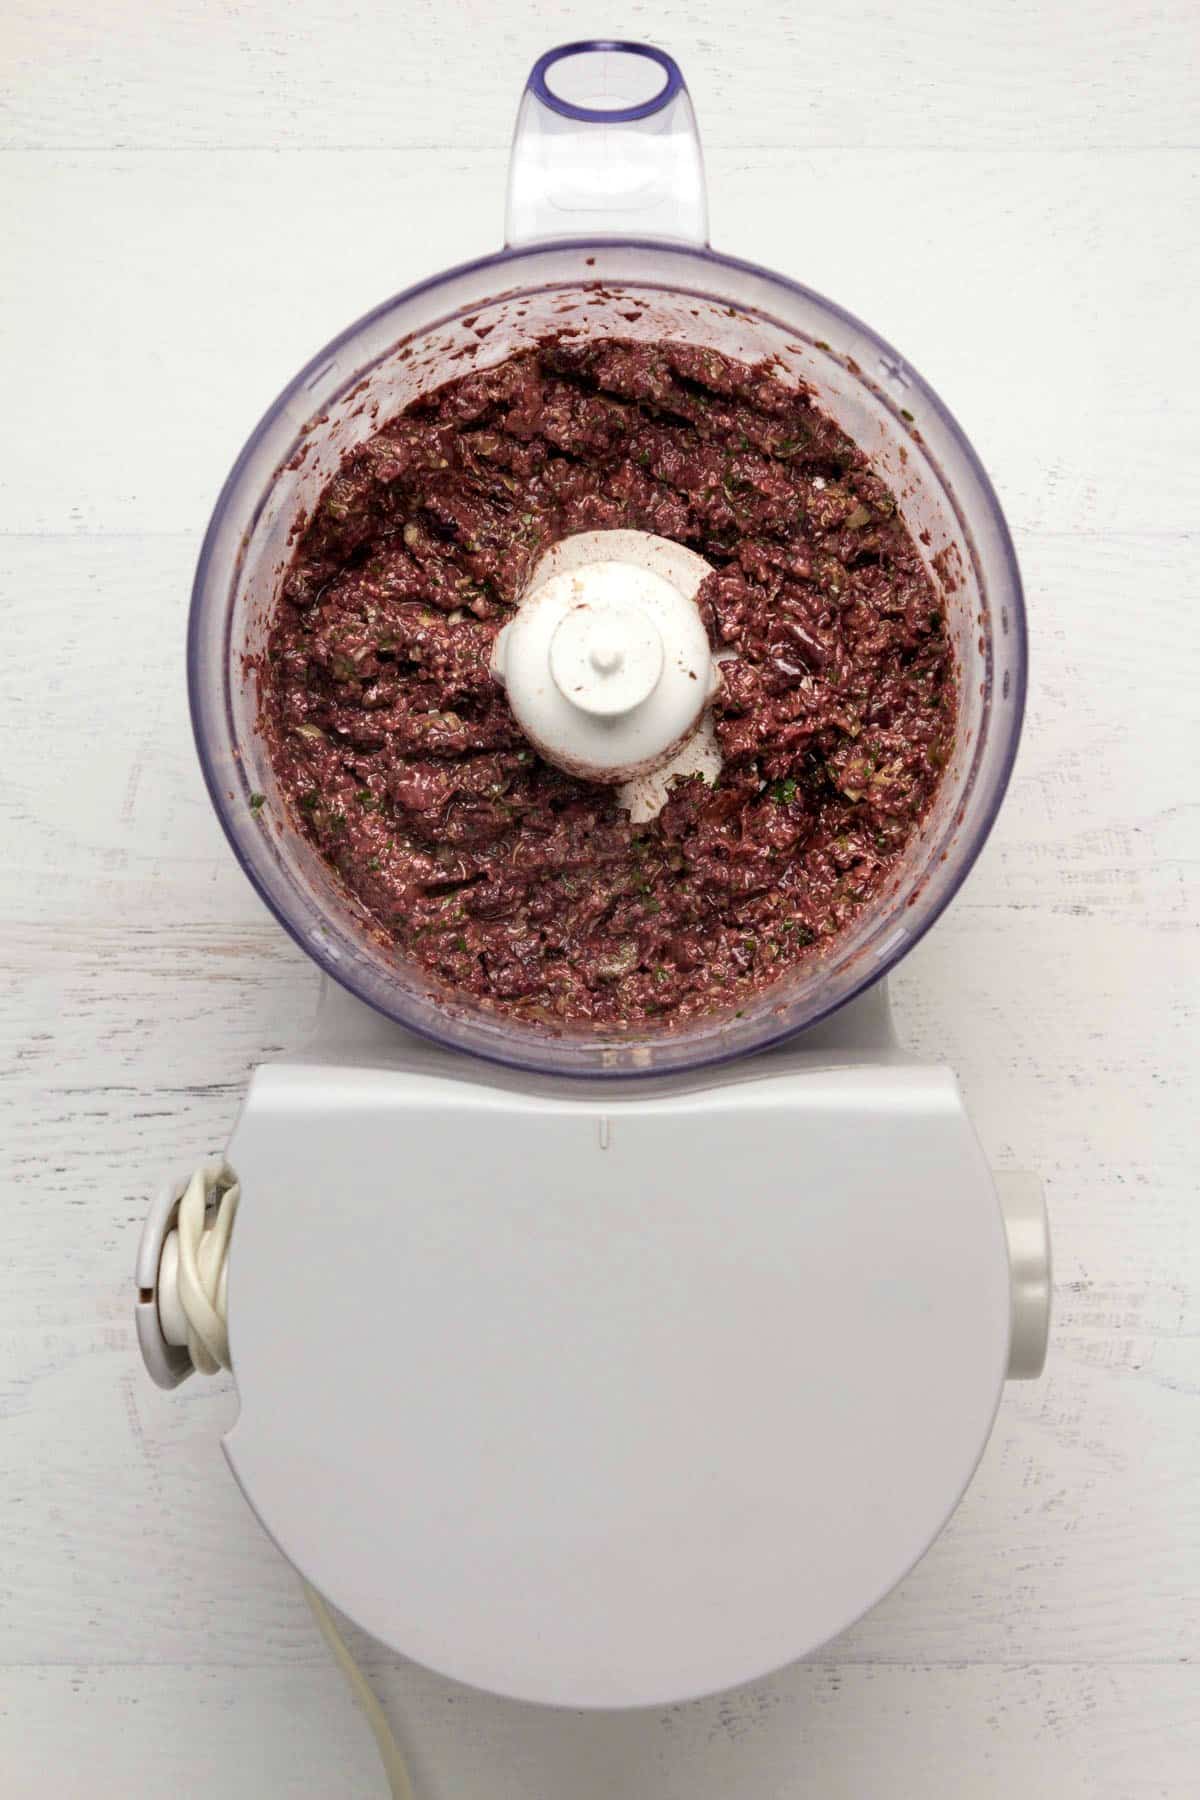 Olive tapenade in a food processor.